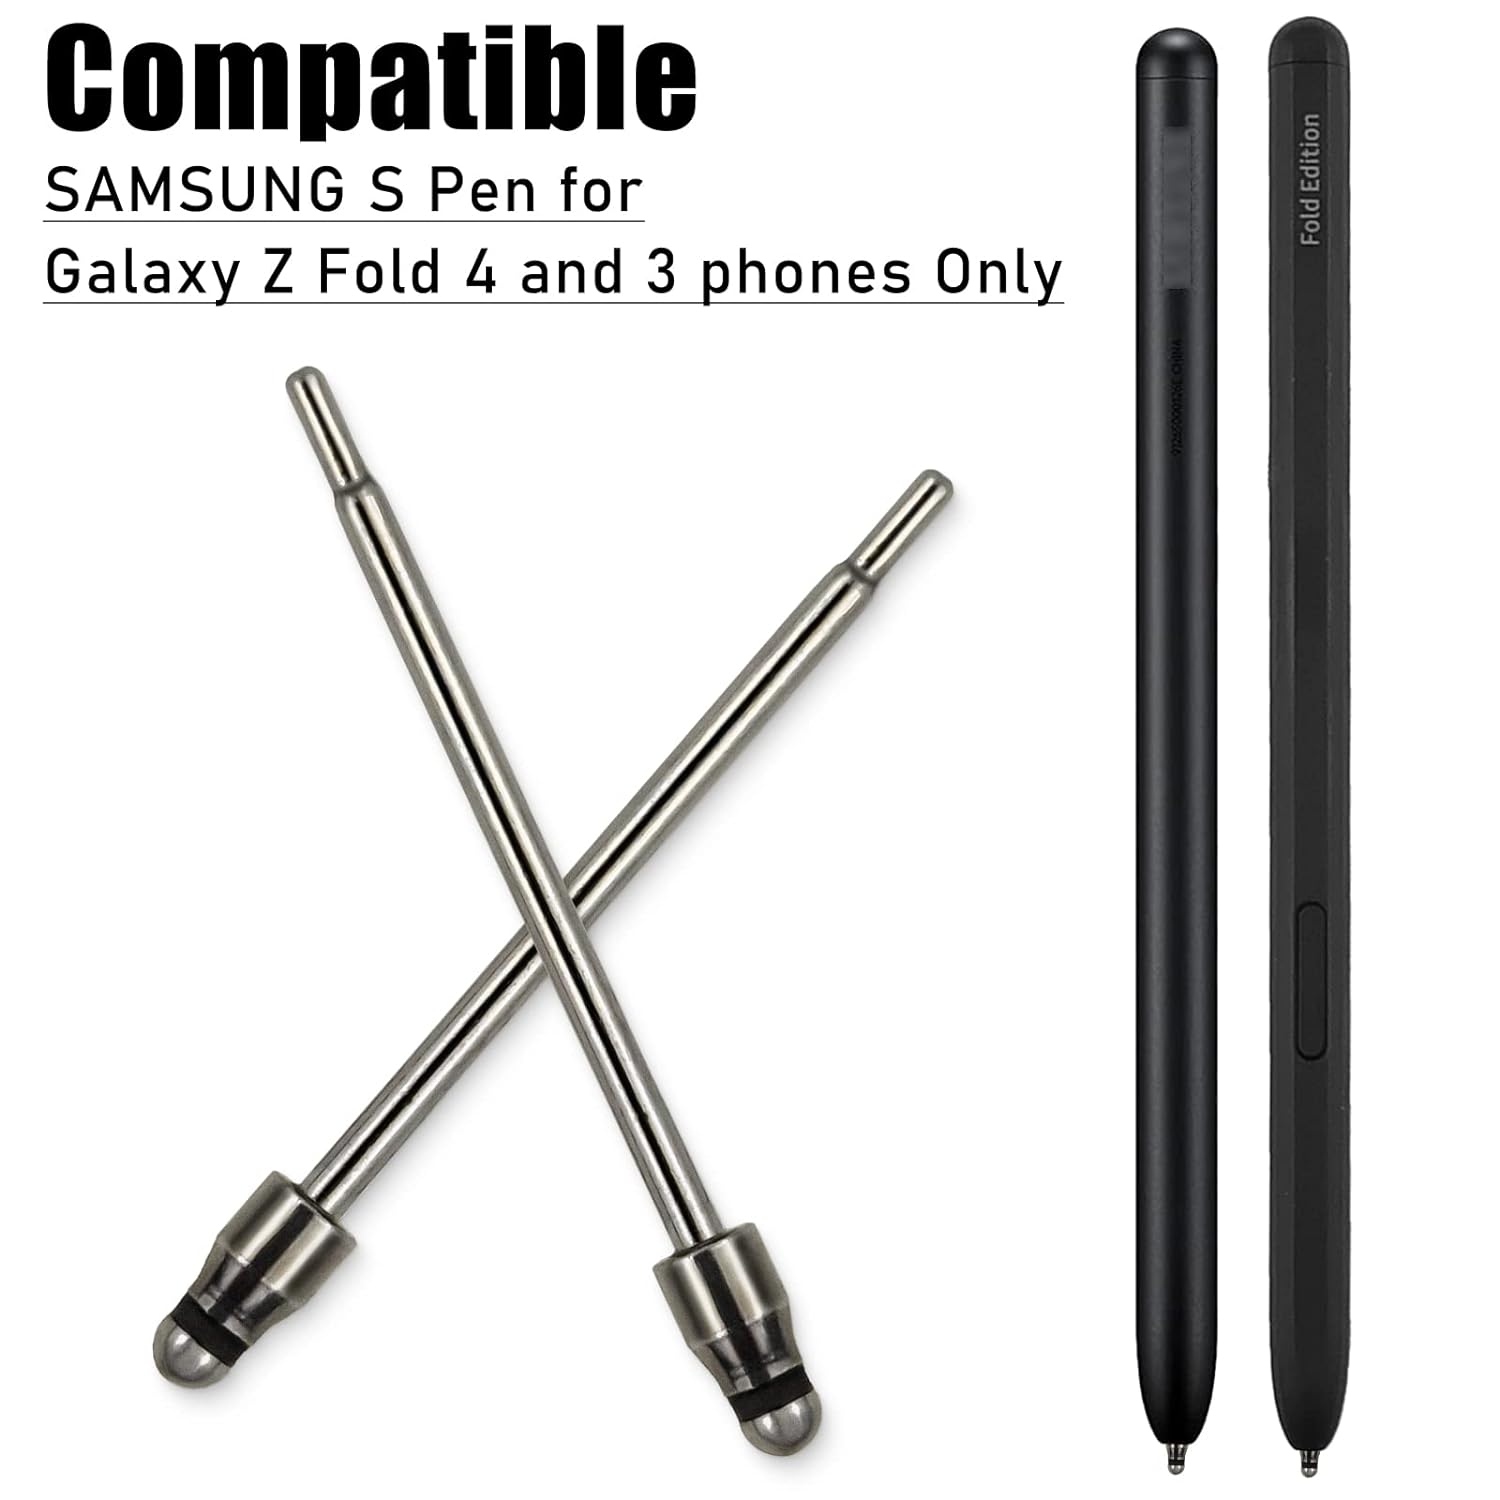 Stainless Ball Pen Tips Replacement Compatible with Samsung Galaxy S Pen Fold Edition Stylus Pen, No Wear Out Z Fold 3 Backup Pencil Nibs ,2 Pcs